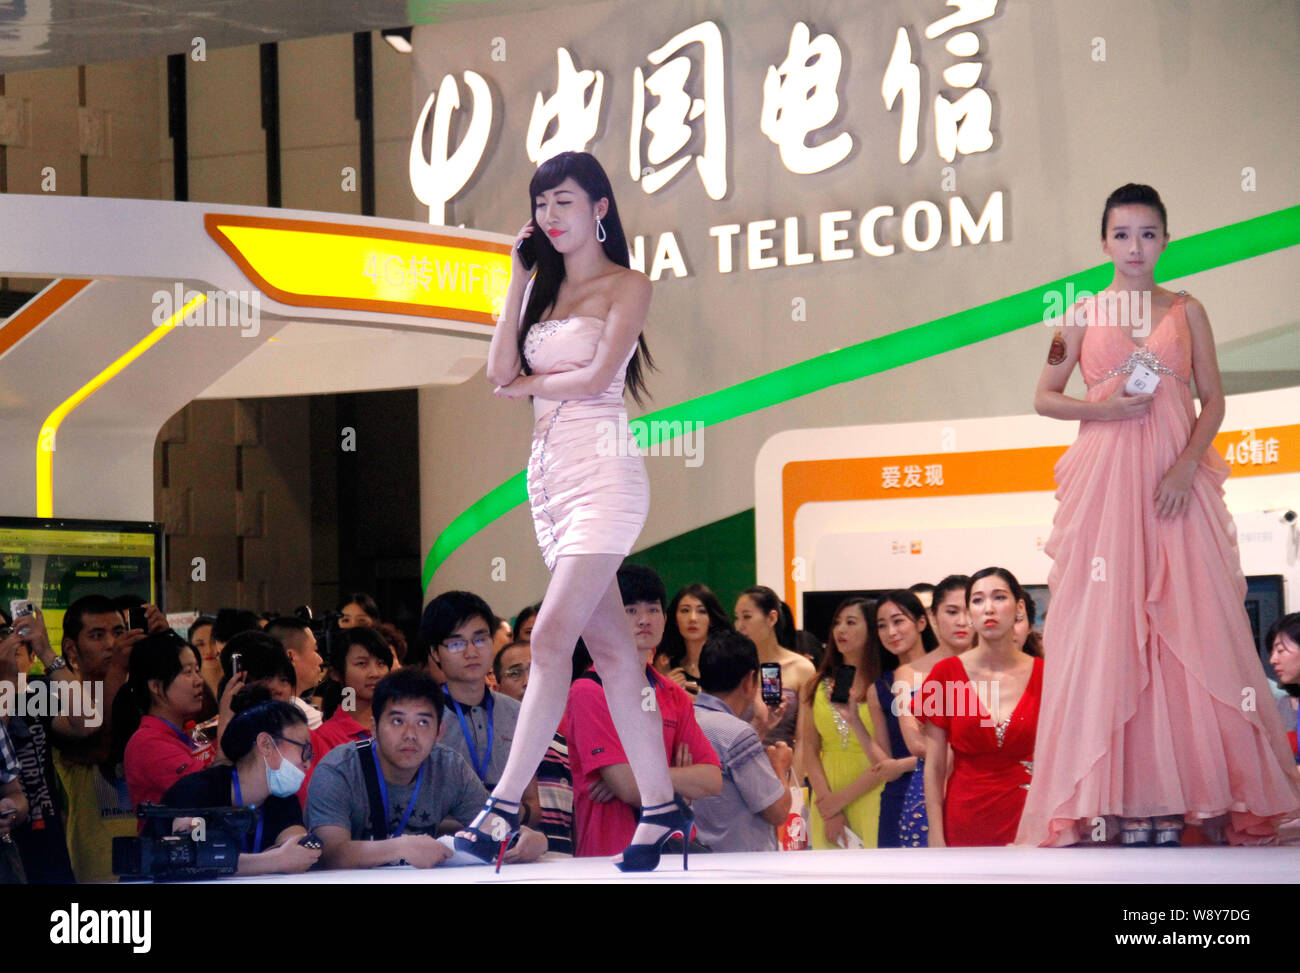 Models display smartphones at the stand of China Telecom during the 2014 Tianyi Mobile Fair & Mobile Internet Forum in Nanjing, east Chinas Jiangsu pr Stock Photo